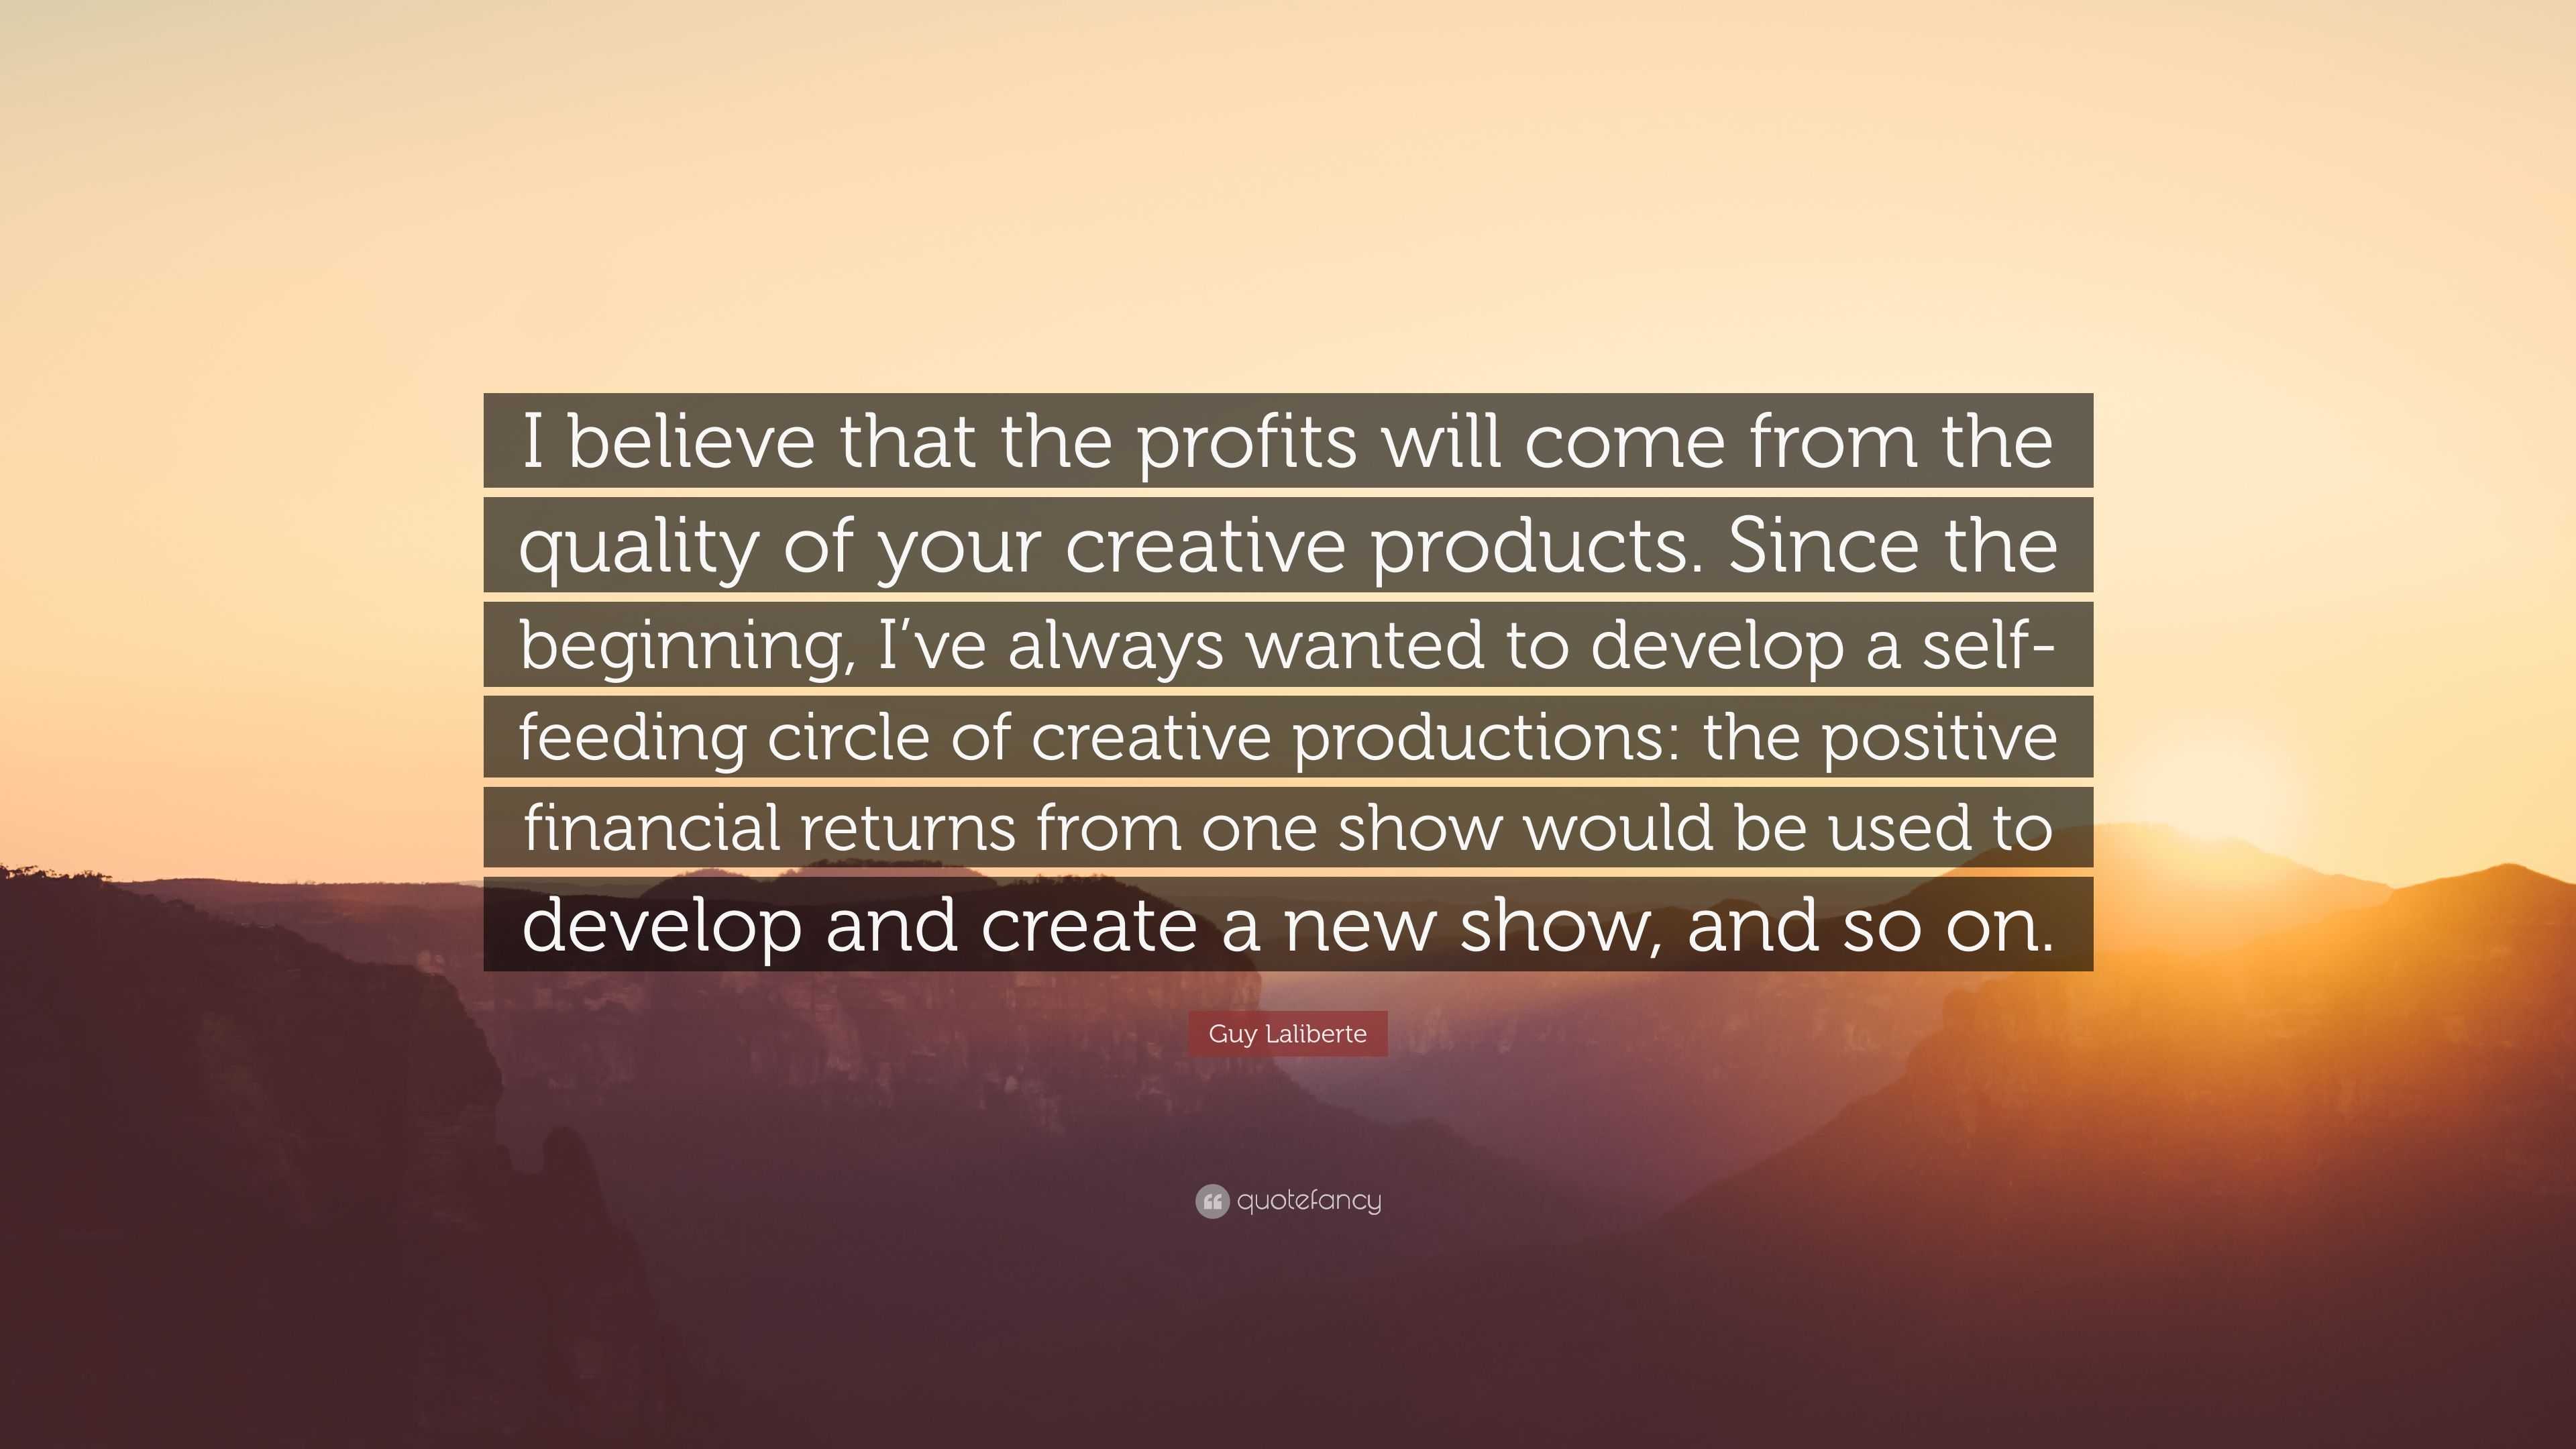 Guy Laliberte Quote: “I believe that the profits will come from the